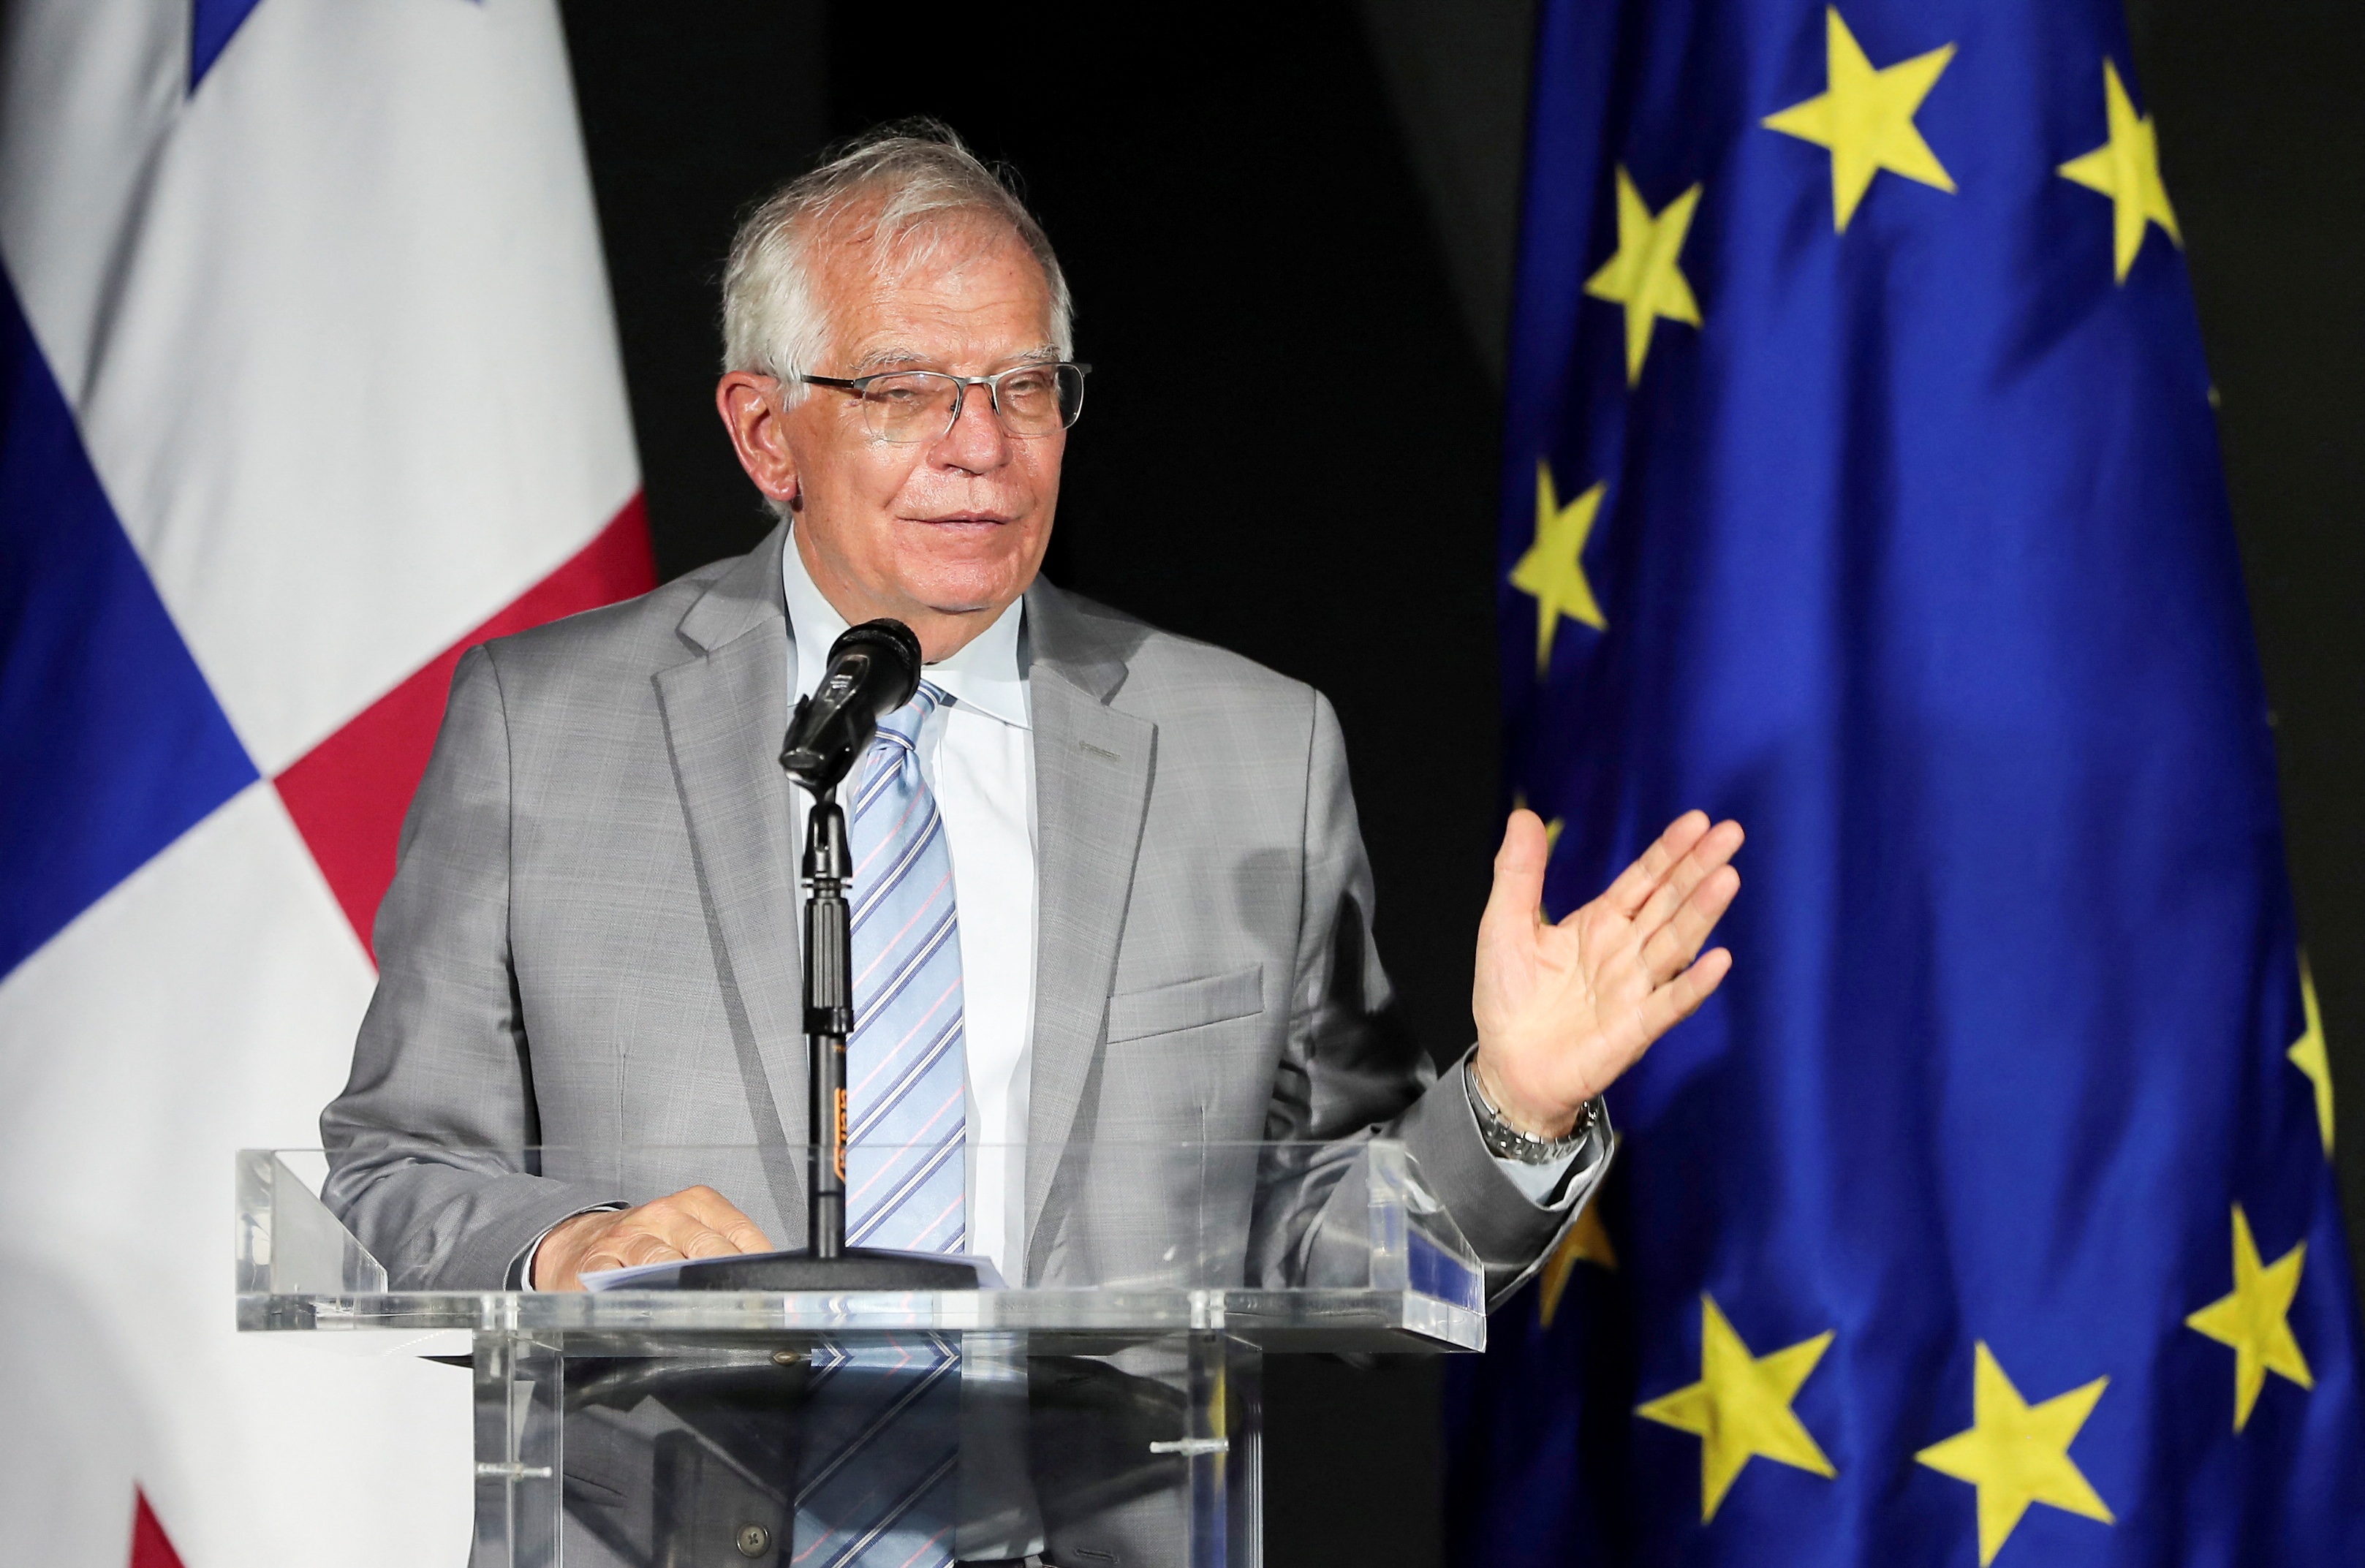 European Union for Foreign Affairs and Security Policy Josep Borrell speaks to the media during a news conference in Panama City